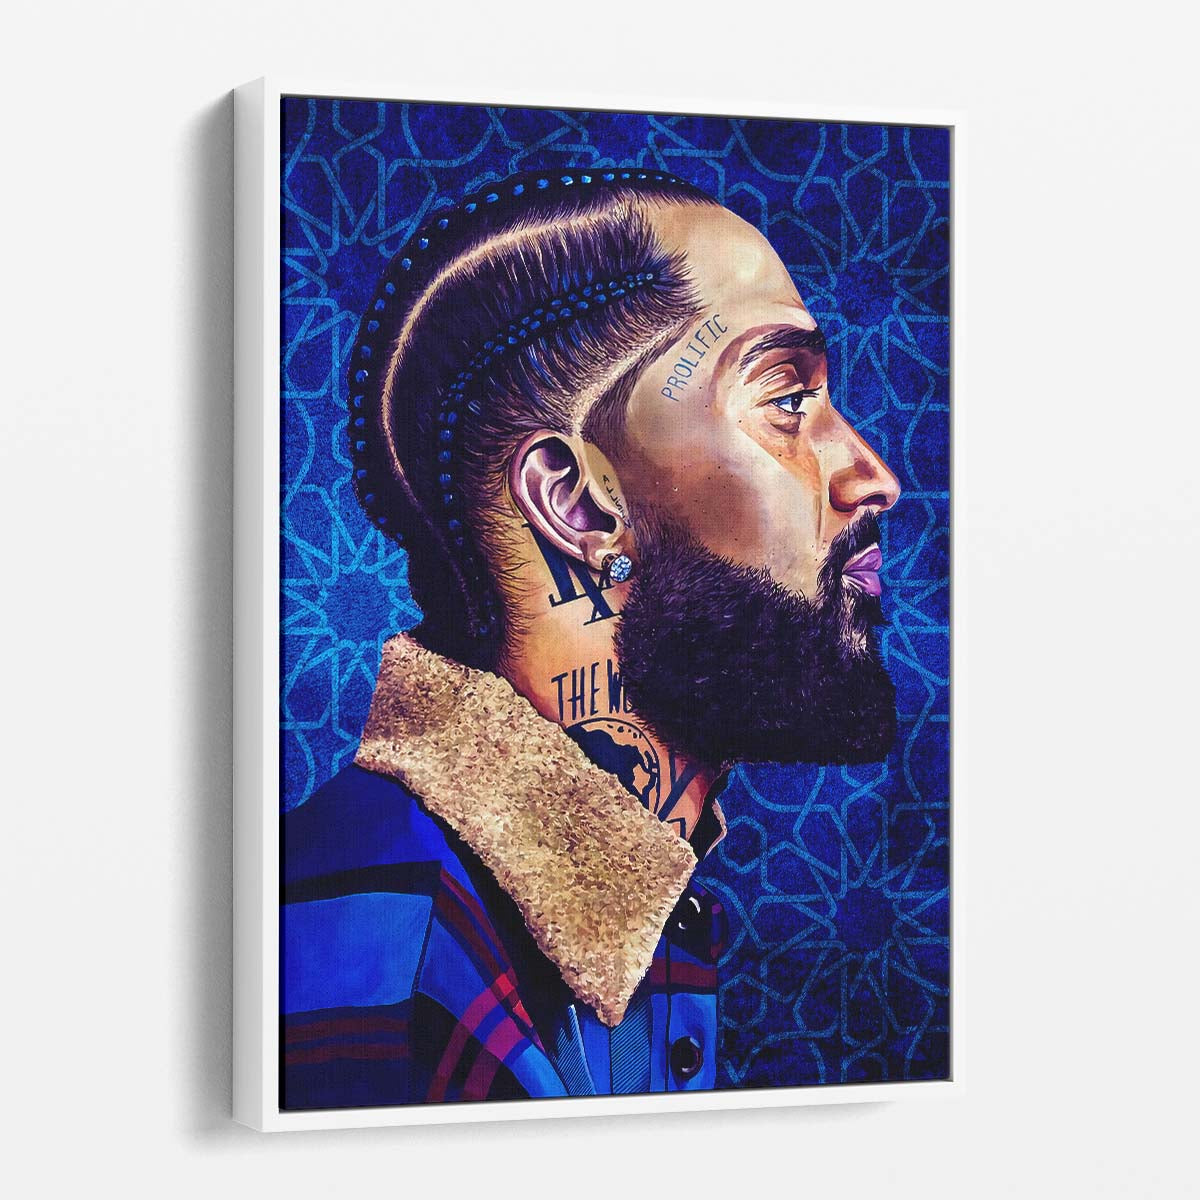 Nipsey Hussle The Marathon Continues Wall Art by Luxuriance Designs. Made in USA.